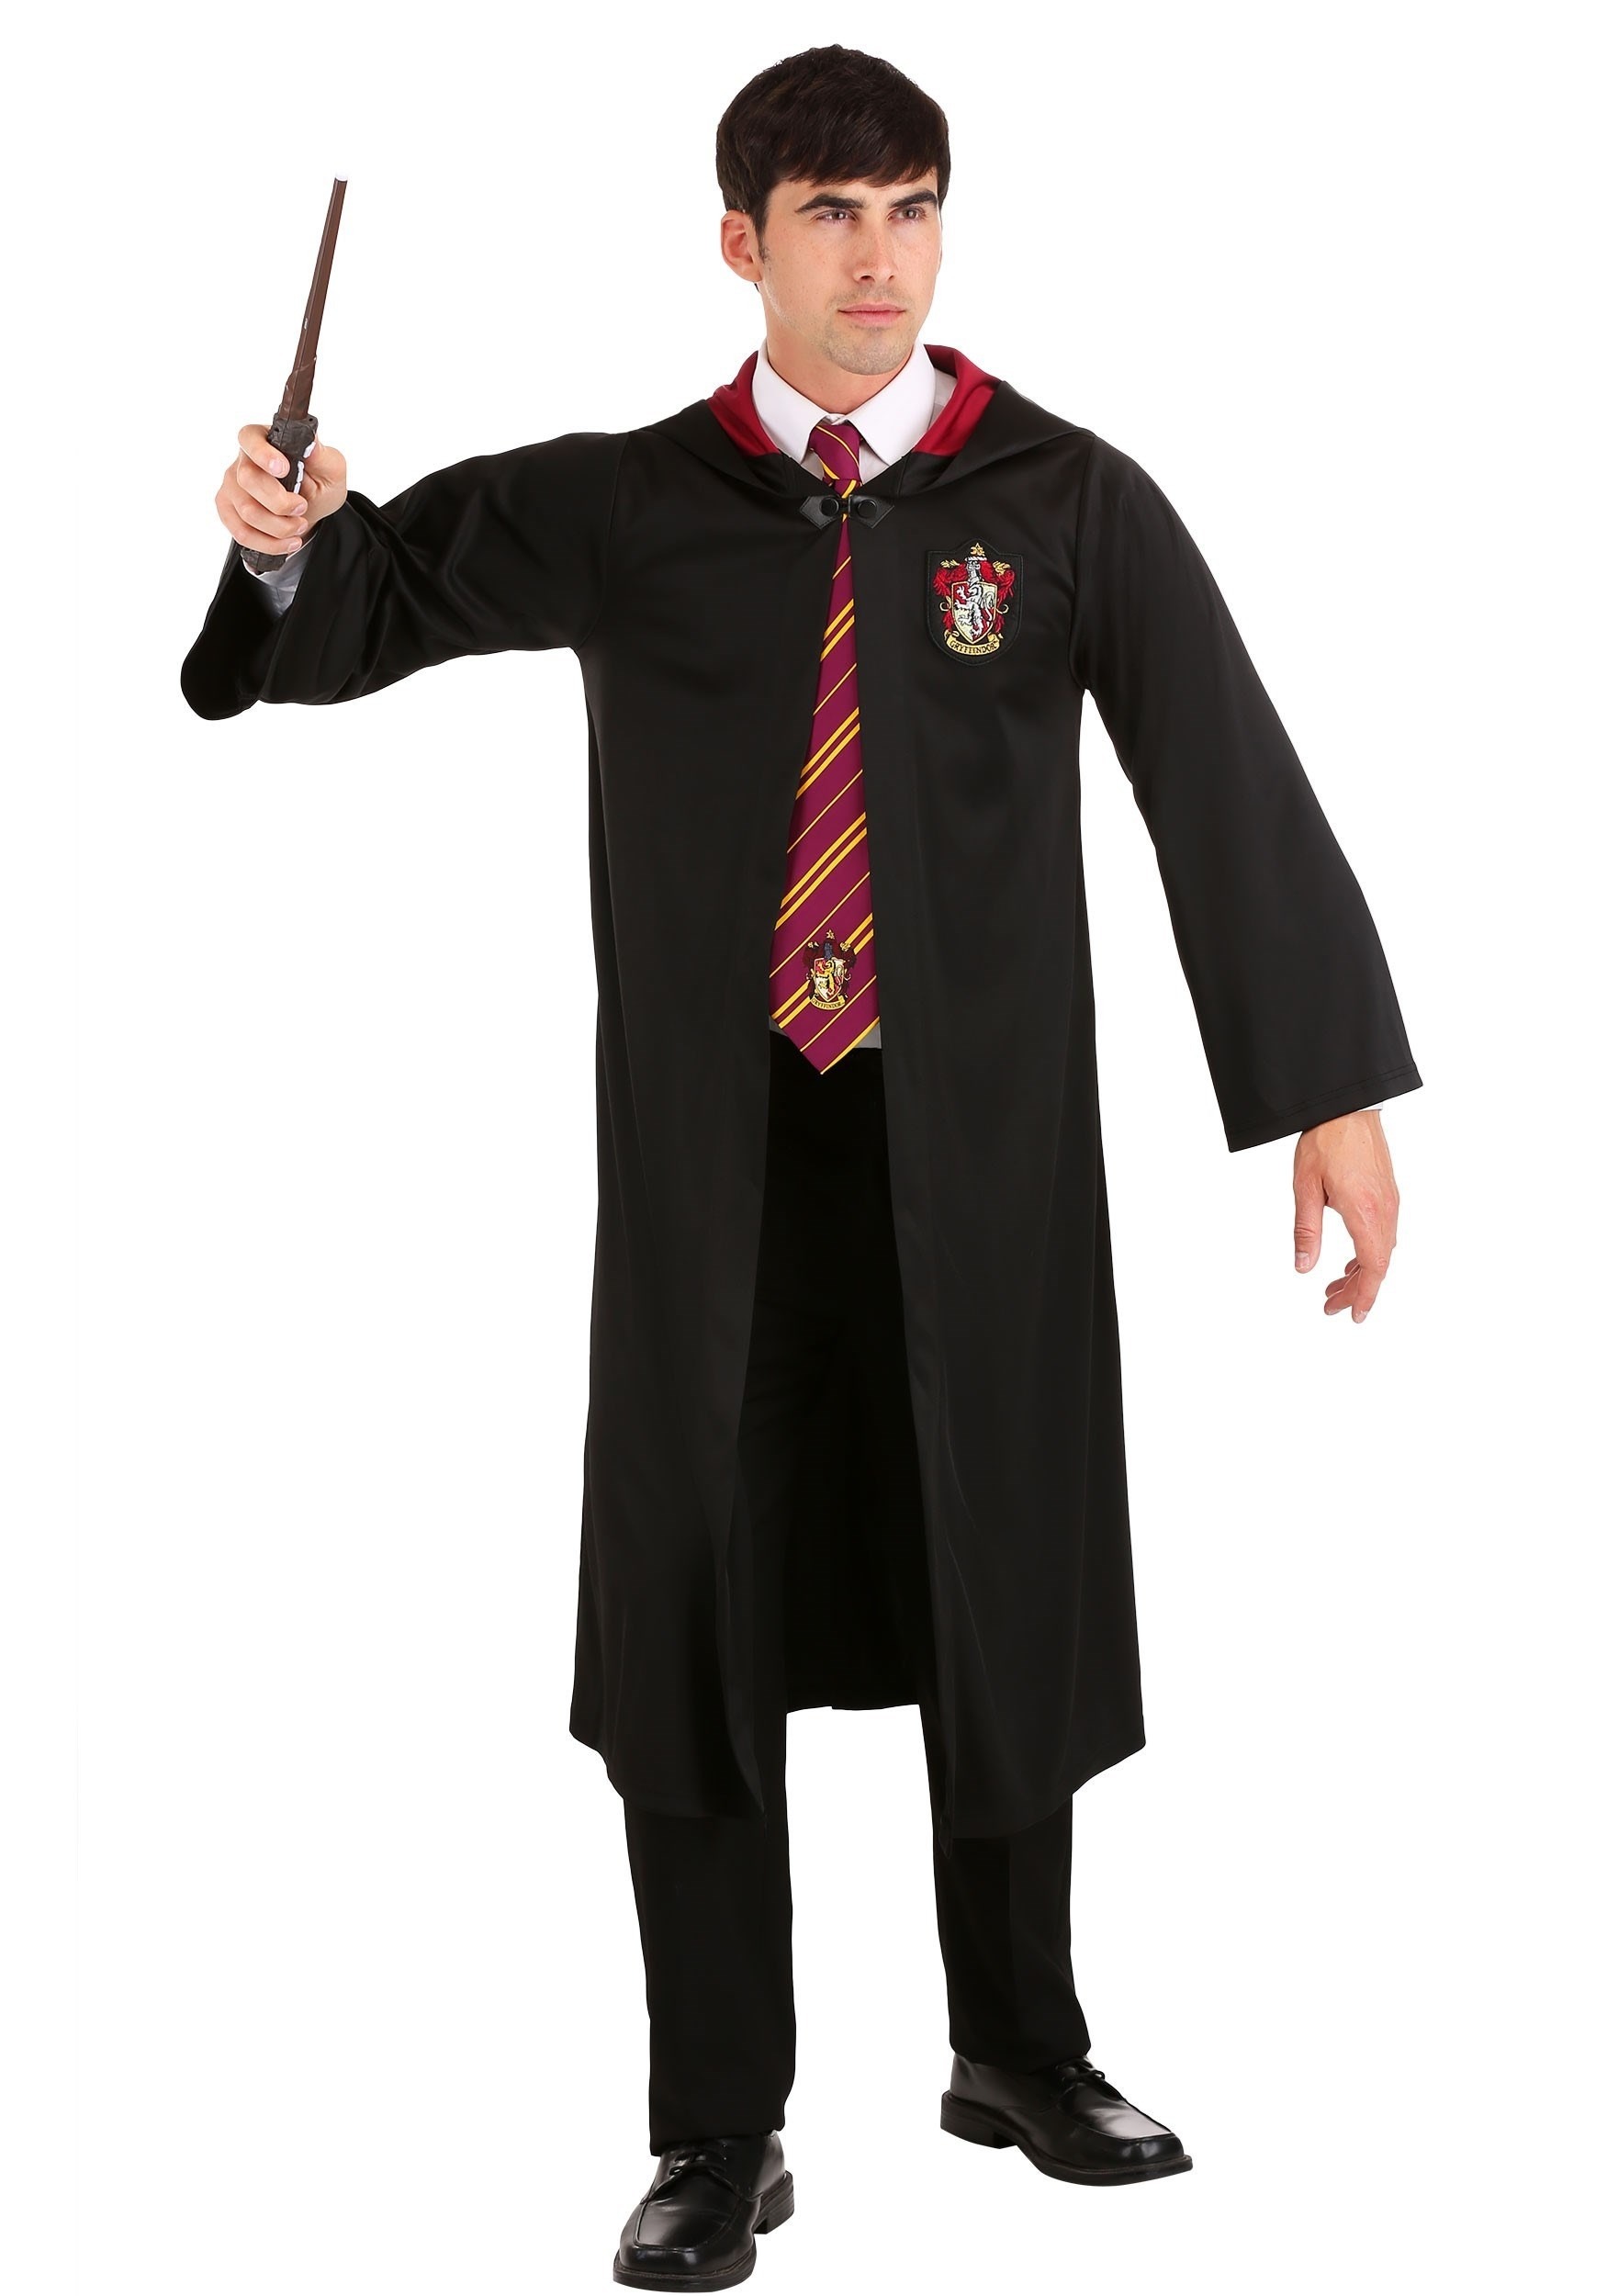 Photos - Fancy Dress Potter FUN Costumes Harry  Gryffindor Plus Size Adult Robe Black/Red FU 